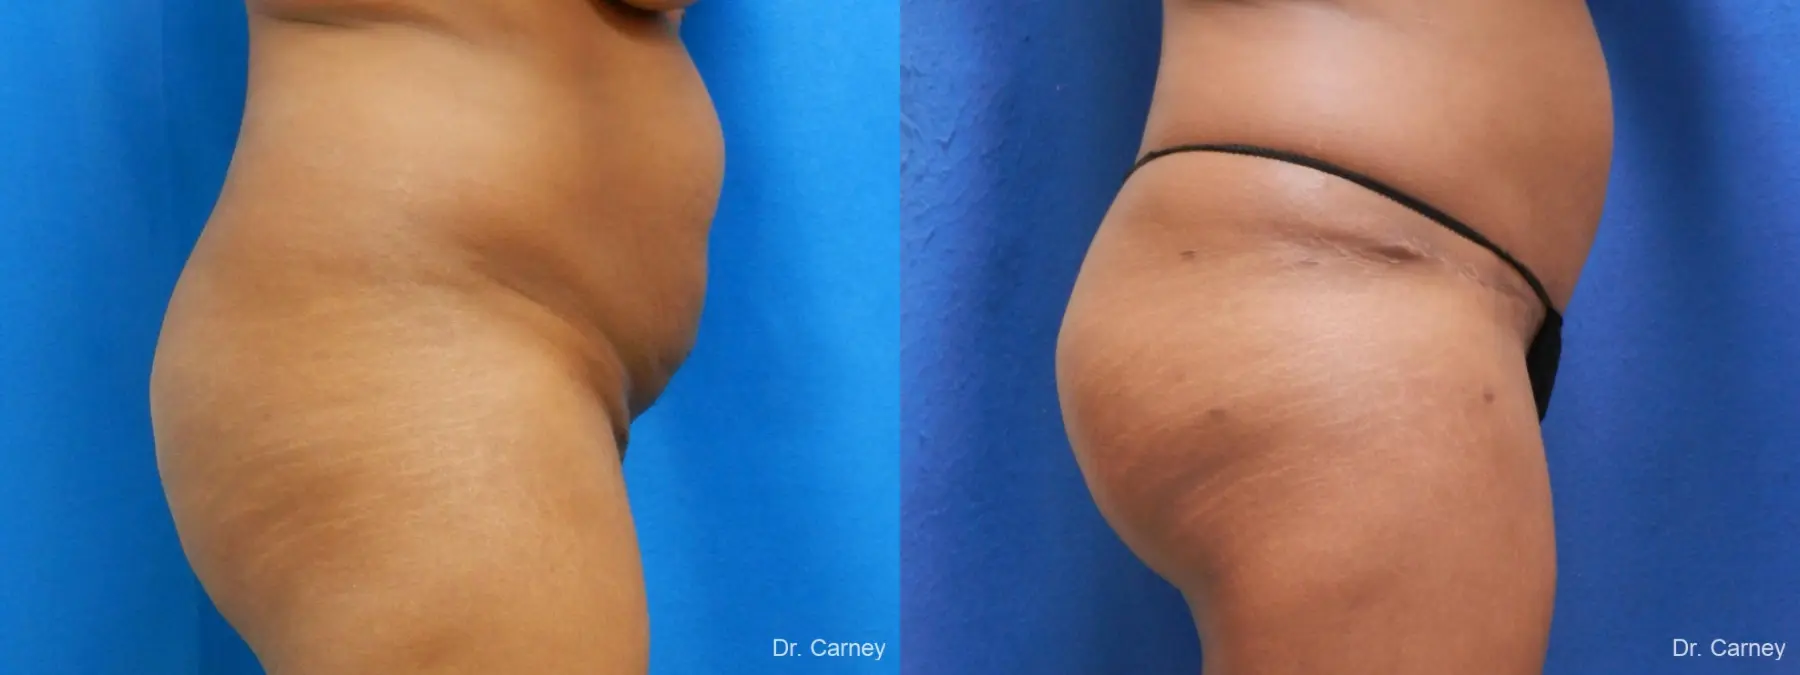 Abdominoplasty: Patient 5 - Before and After 1